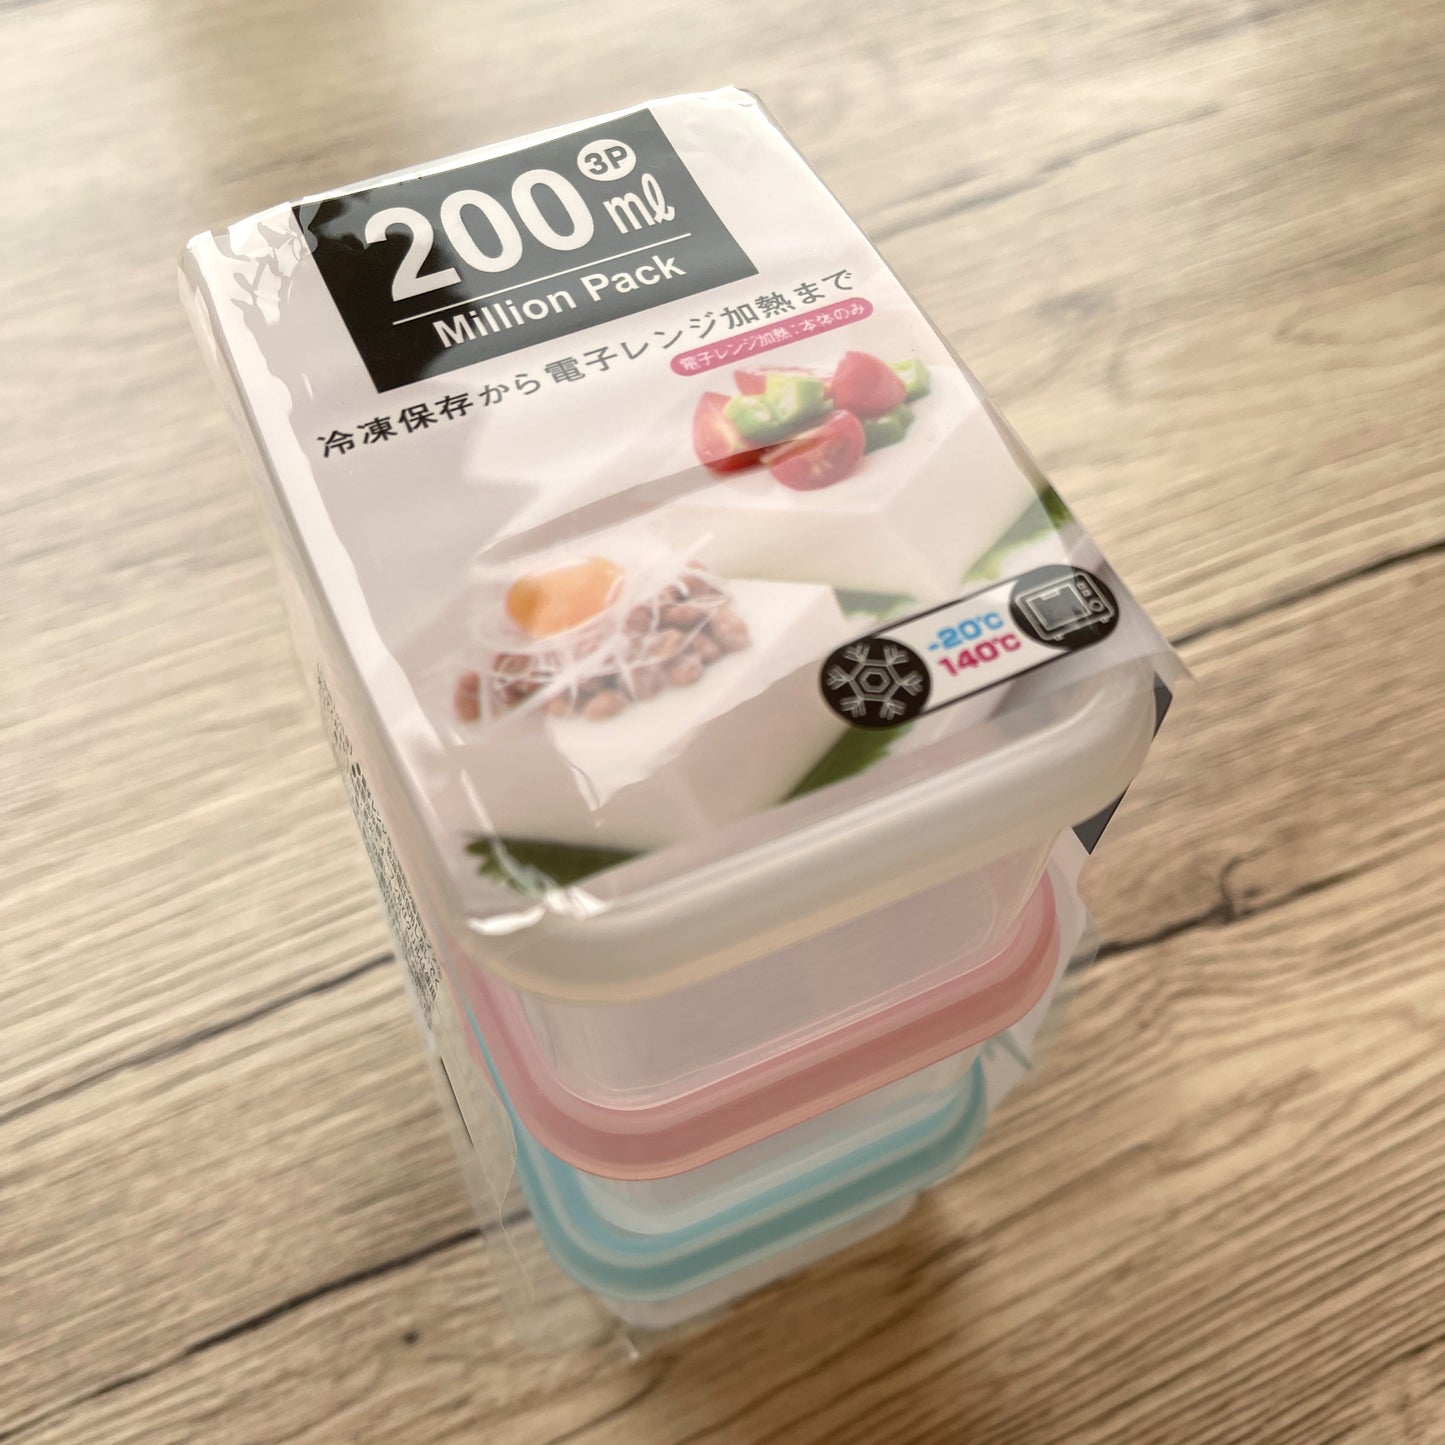 Storage Containers 200ml x 3 (Made in Japan)